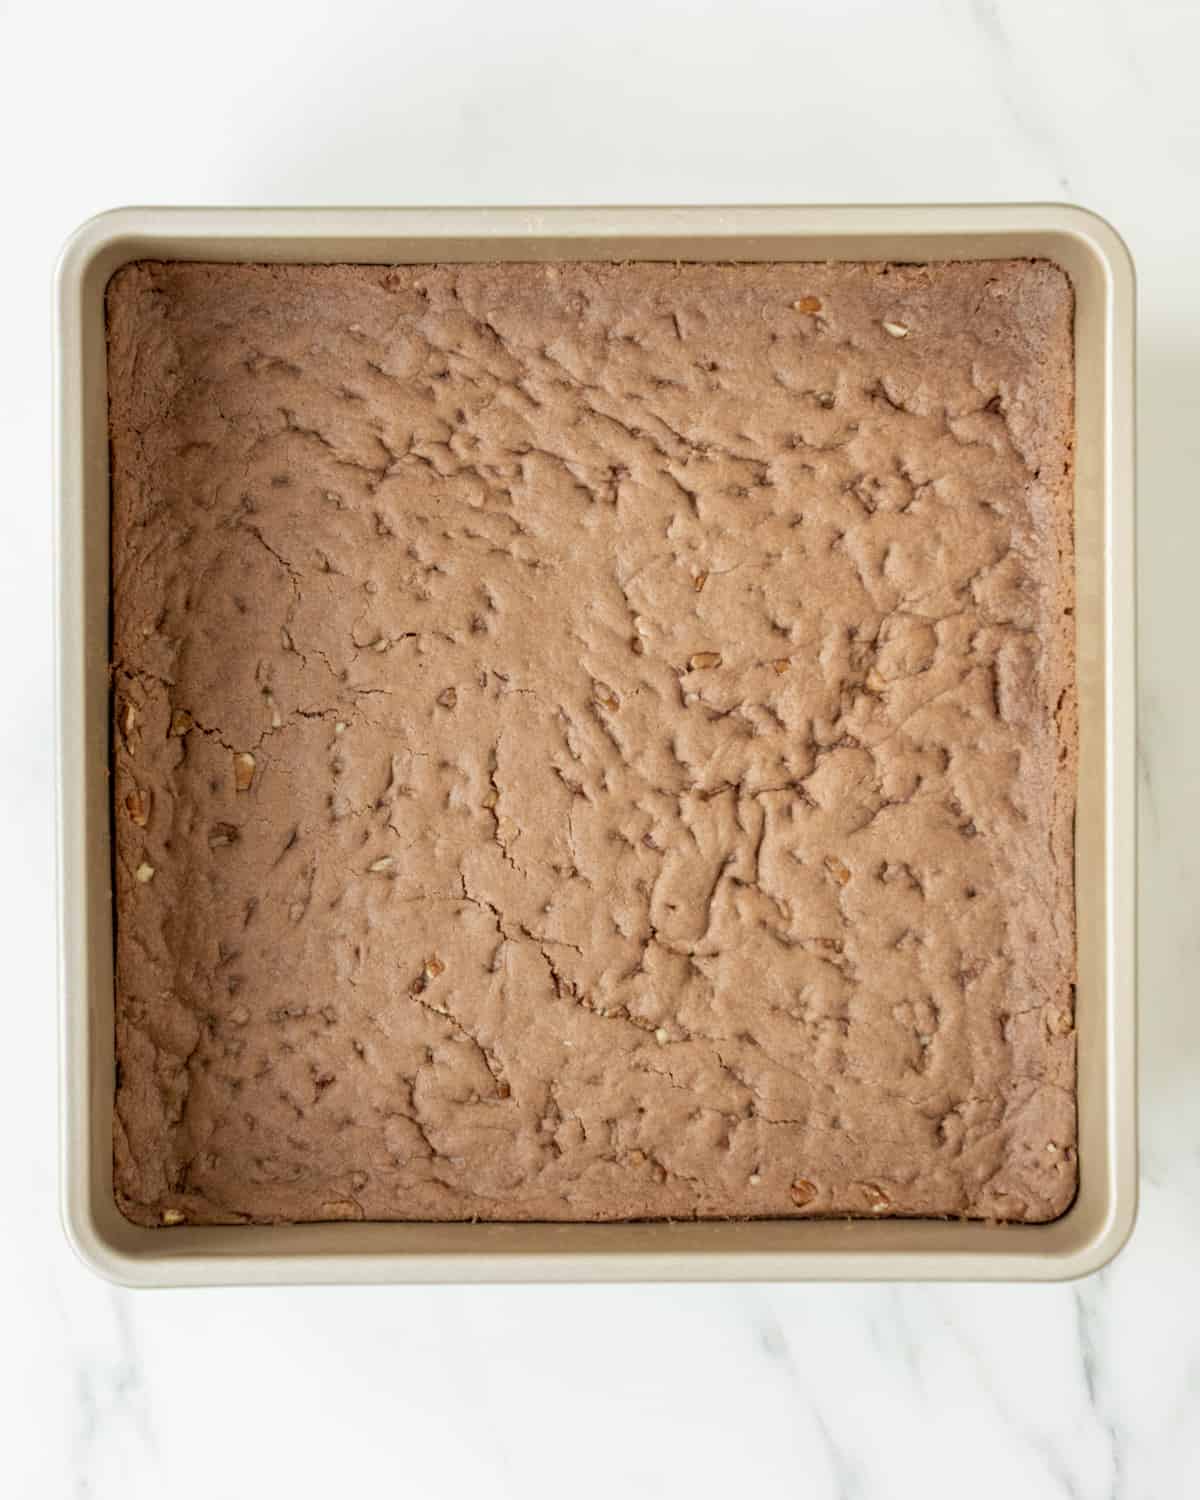 A square baking pan filled with the cooked brownie batter.  